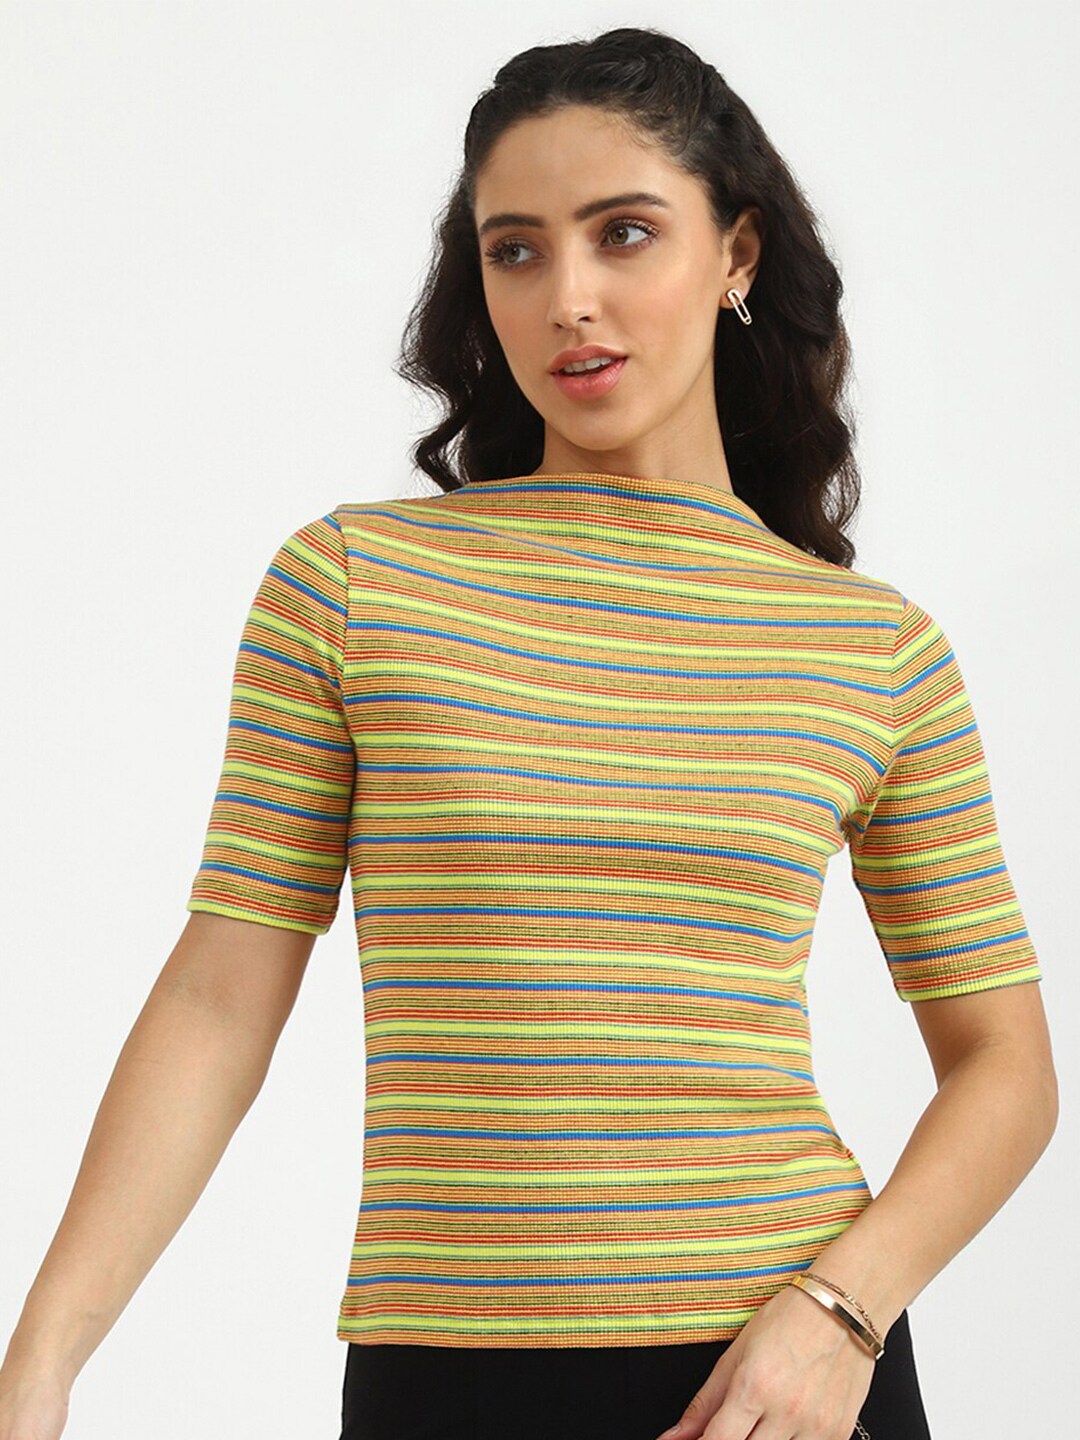 United Colors of Benetton Yellow & Pink Striped Top Price in India